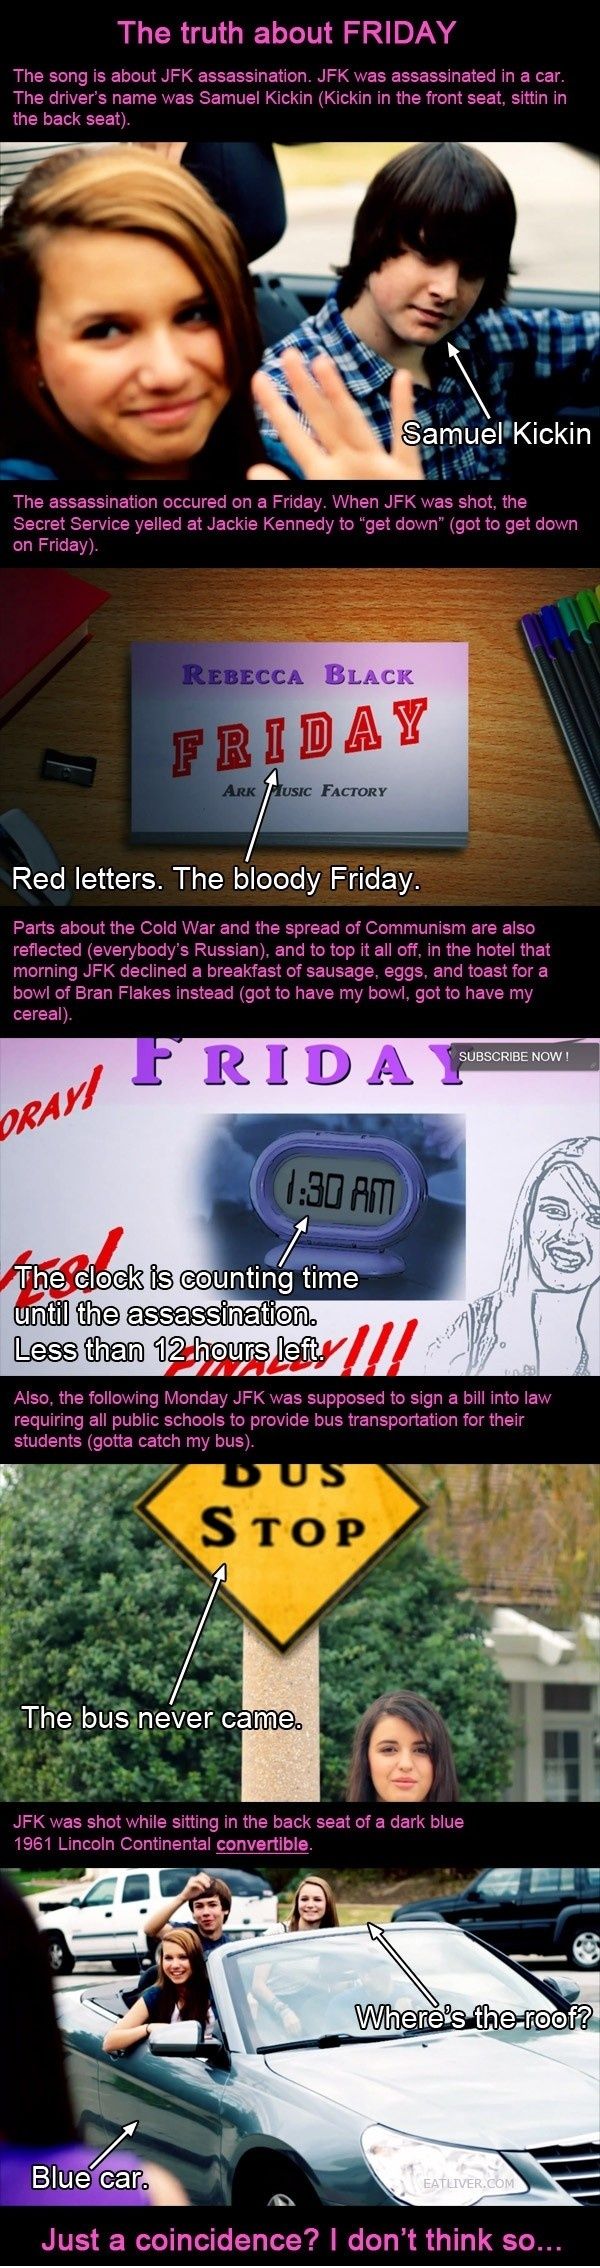 The truth about Friday.